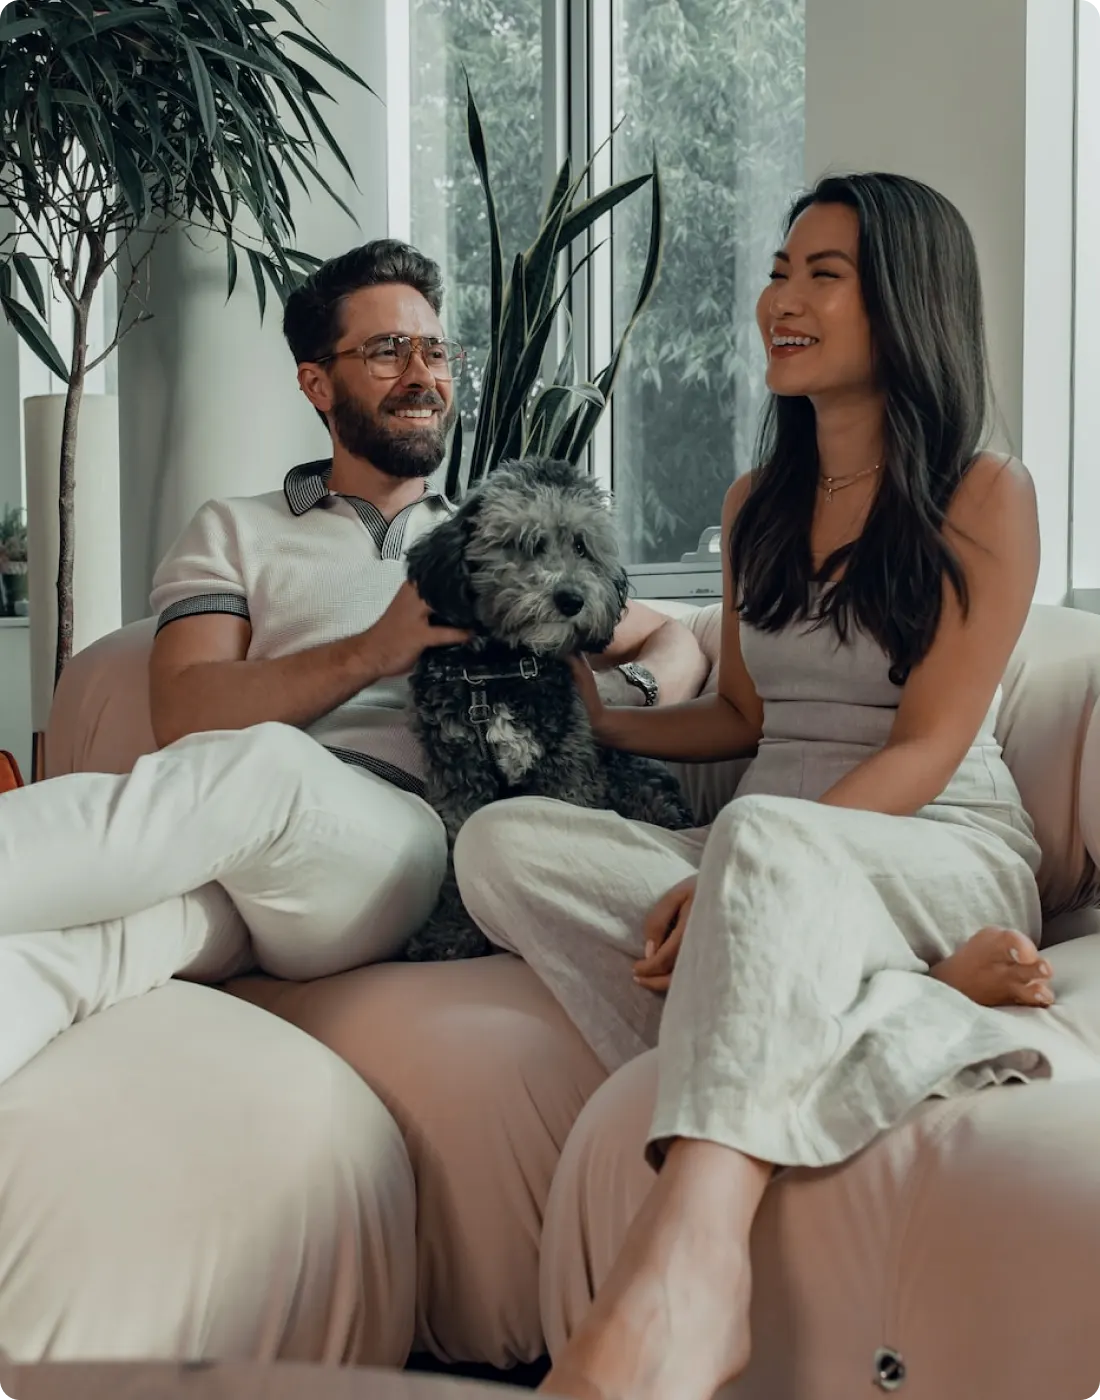 A picture of a happy couple sitting on a sofa with a dog between them.